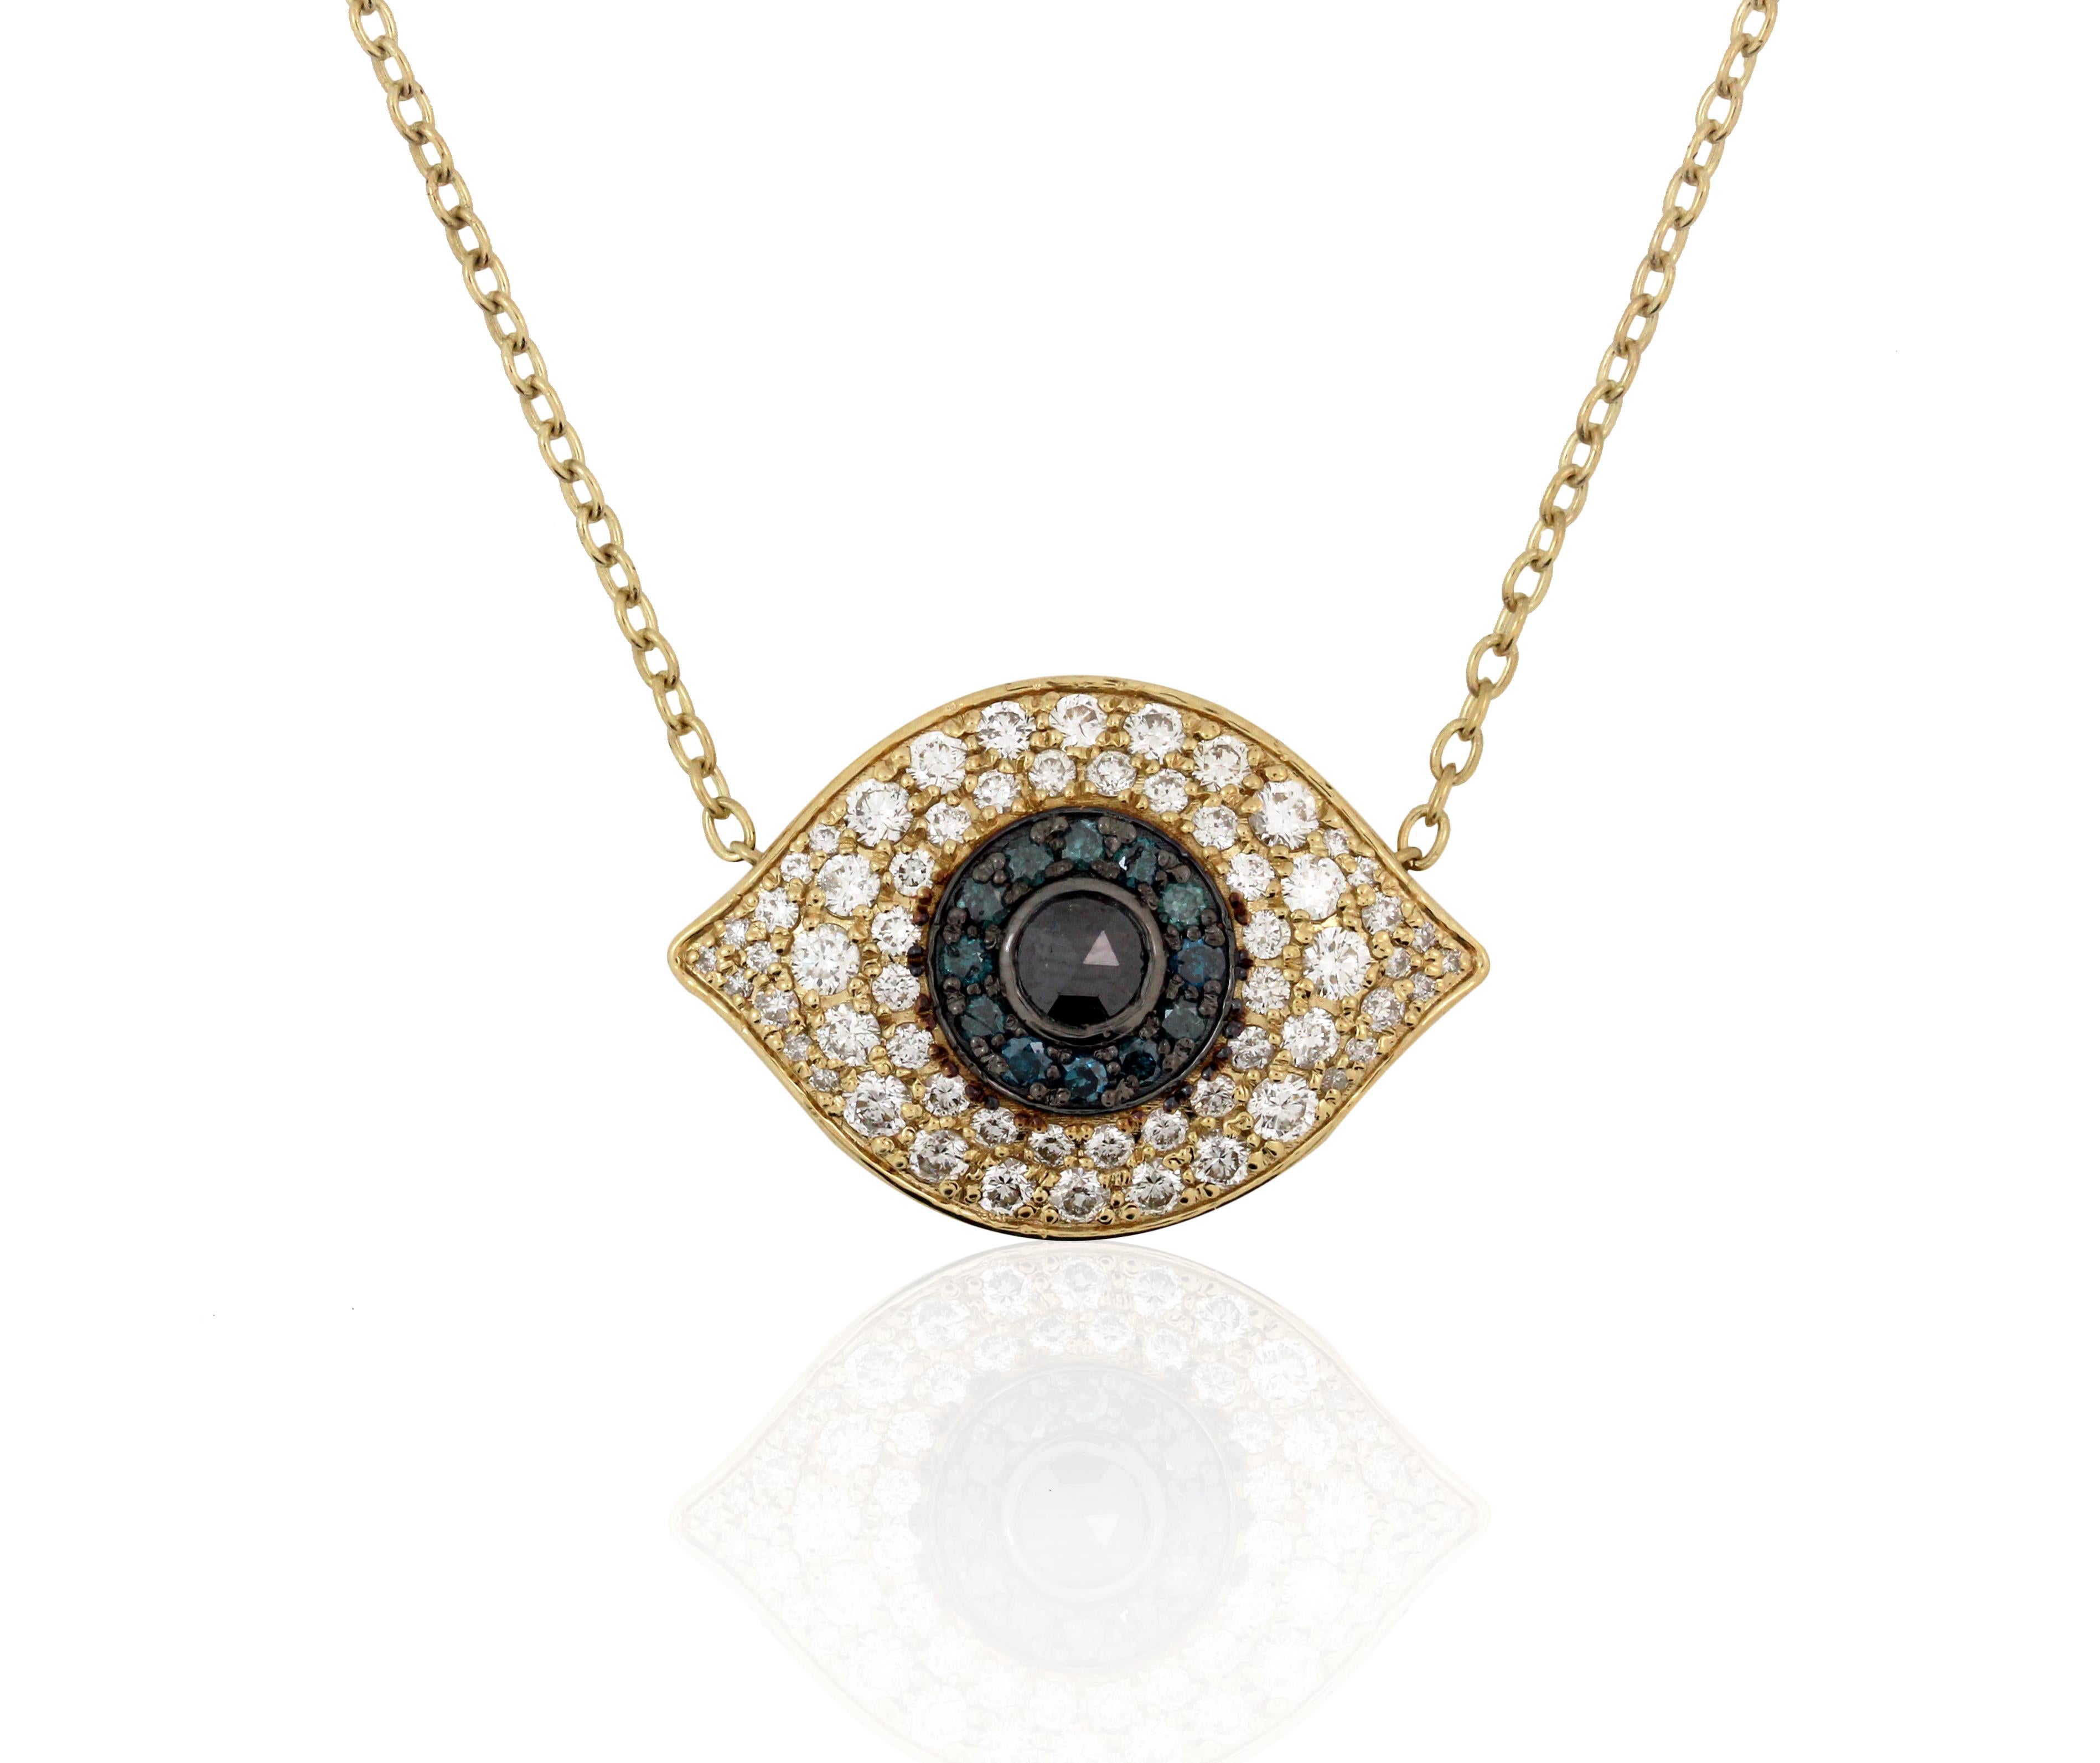 14K Yellow Gold Diamond Sapphire Black Diamond Large Evil Eye Pendant Necklace

1.19 carat G color, SI clarity diamonds. 0.28 carat Blue Sapphire. 0.26 carat Black Diamond

8.05 grams 14K gold

Pendant is 0.7 inch length x 1 inch width 

Chain is 17